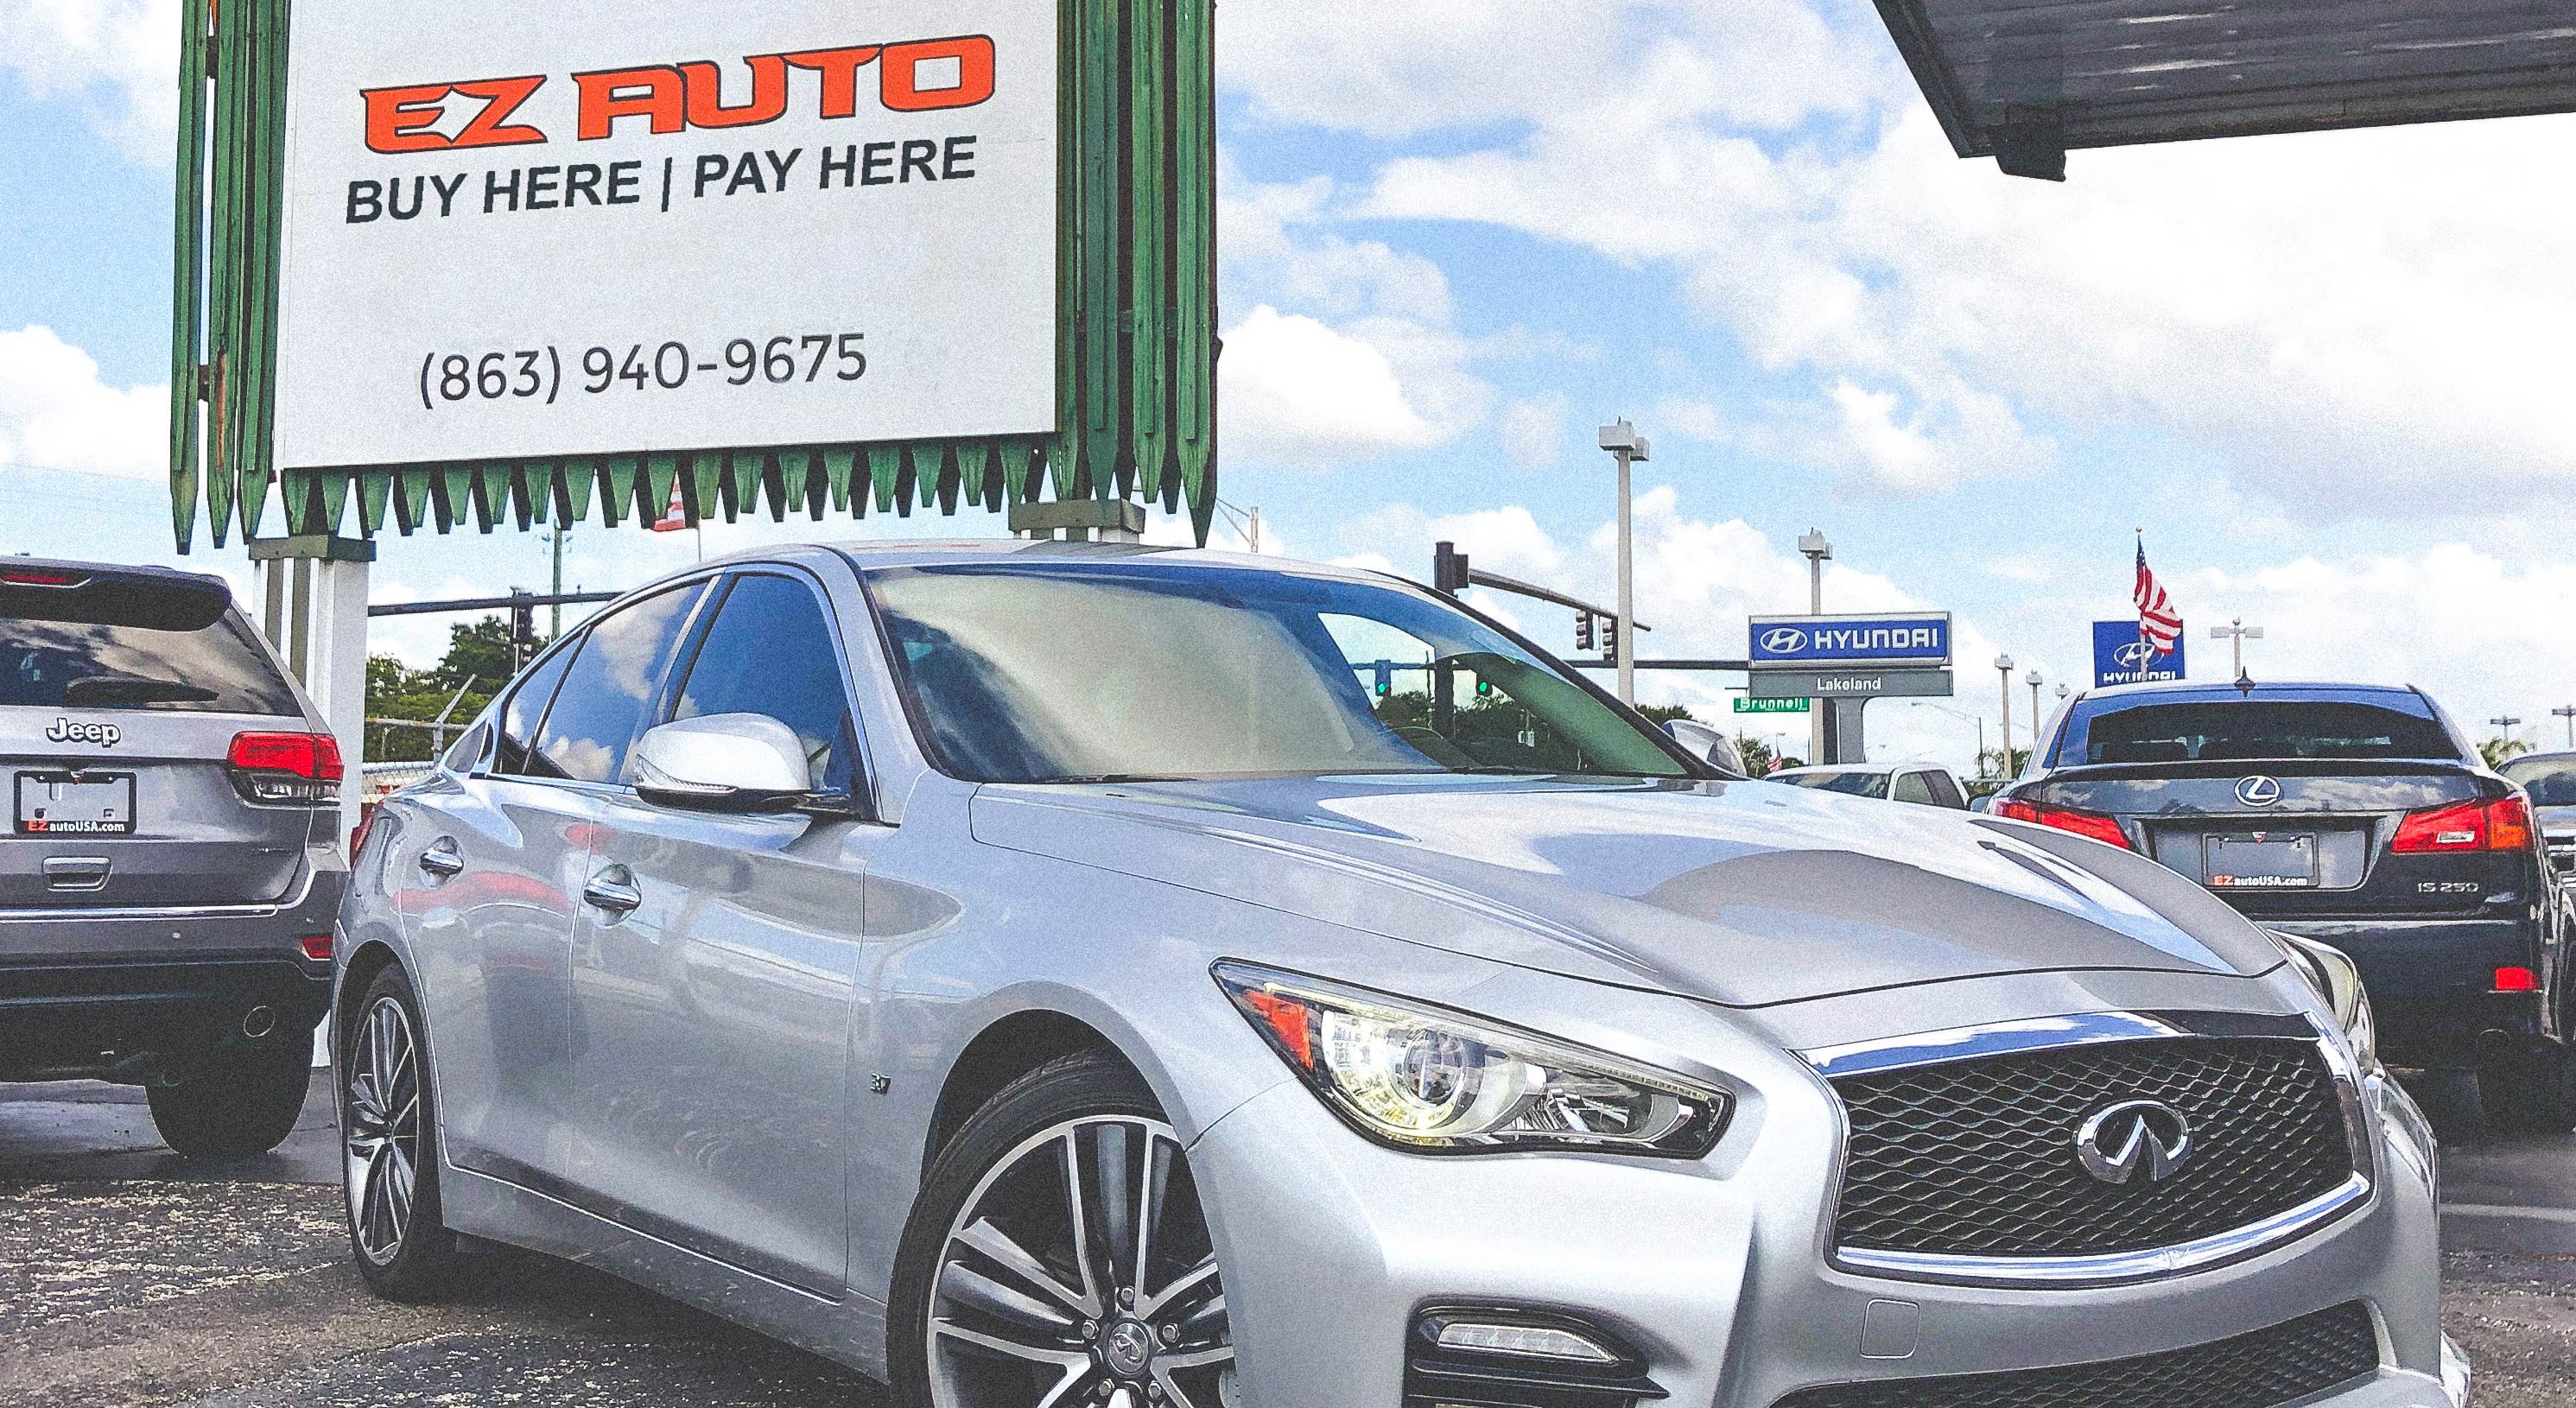 infiniti Q50s financed through our Buy Here Pay Here by EZ AUTO Lakeland. Customer was approved regardless of their credit.